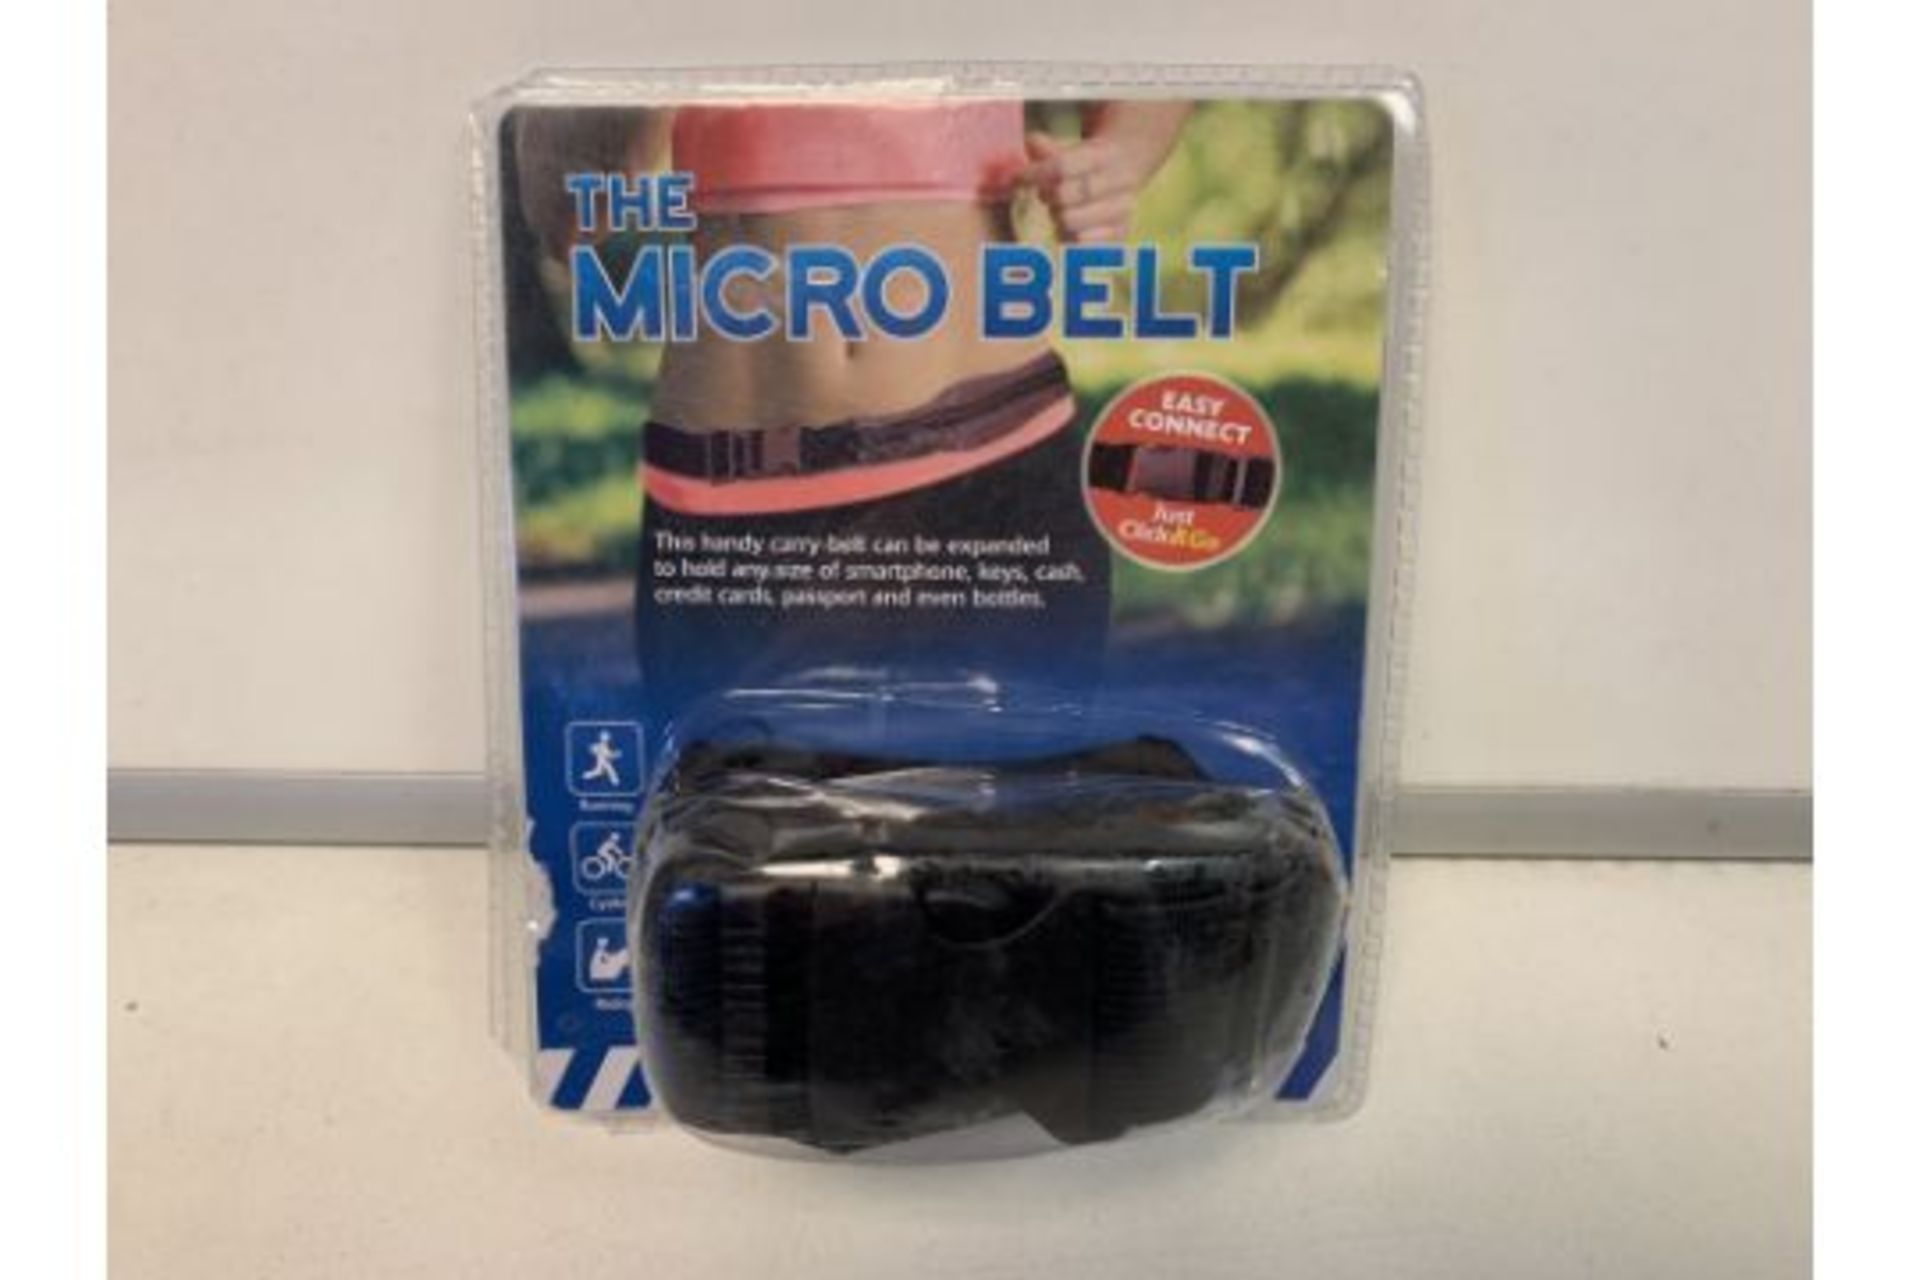 36 X NEW PACKAGED 'THE MICRO BELTS' HAND CARRY BELT CAN BE EXPANDED TO HOLD ANY SIZE OF